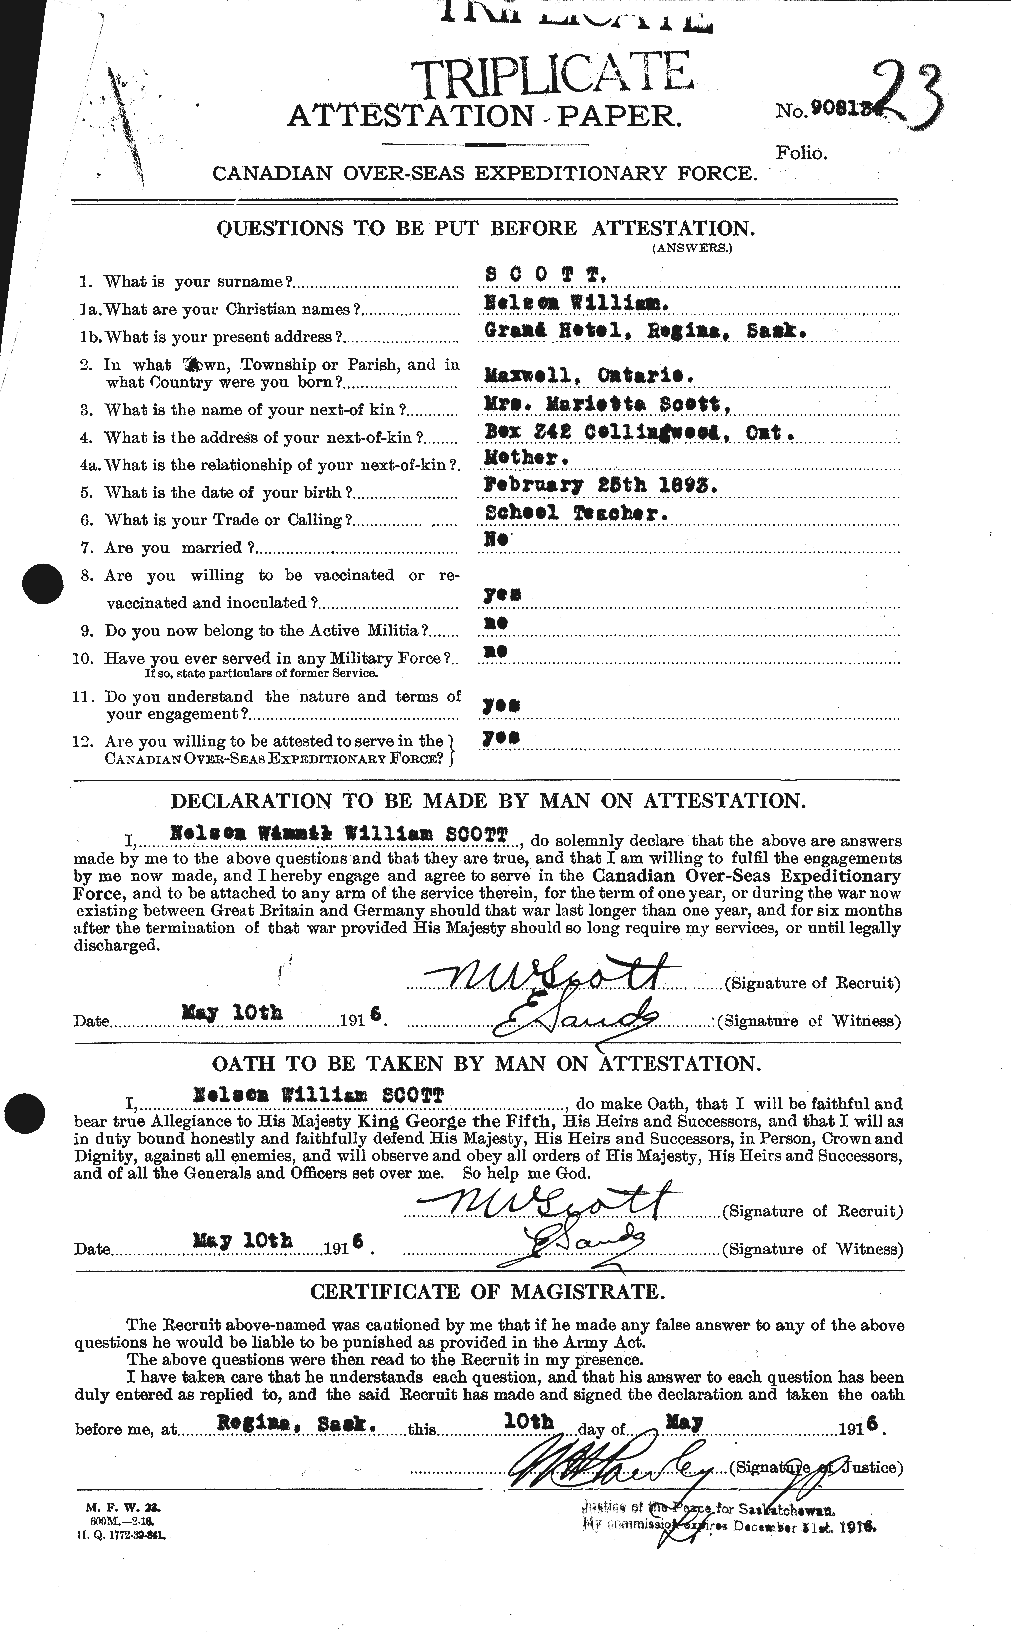 Personnel Records of the First World War - CEF 083211a